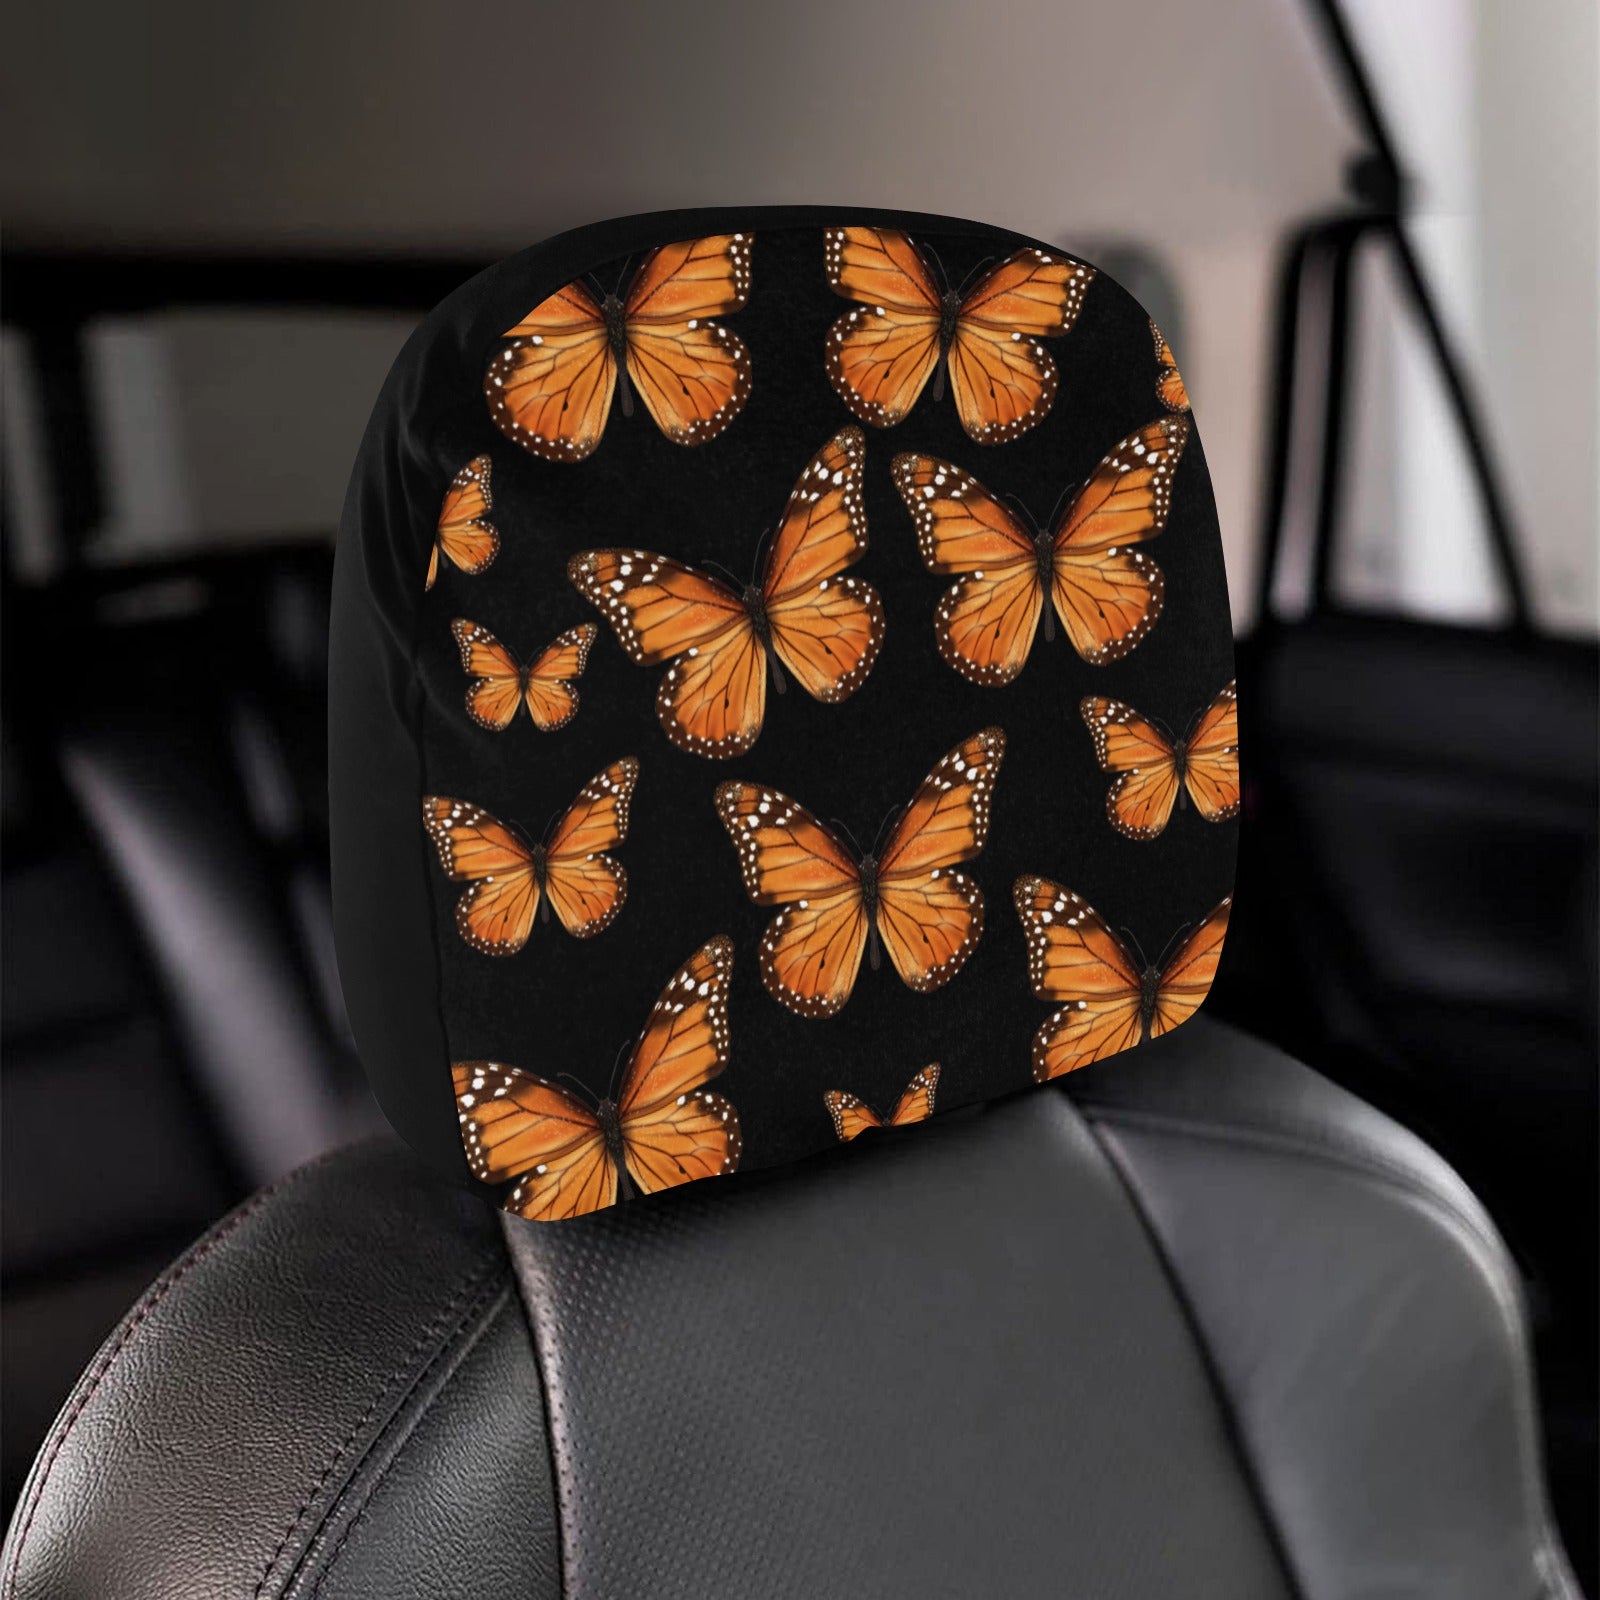 Monarch Butterfly Car Seat Headrest Cover (2pcs), Vintage Truck Suv Van Vehicle Auto Decoration Protector New Car Gift Women Aesthetic Starcove Fashion